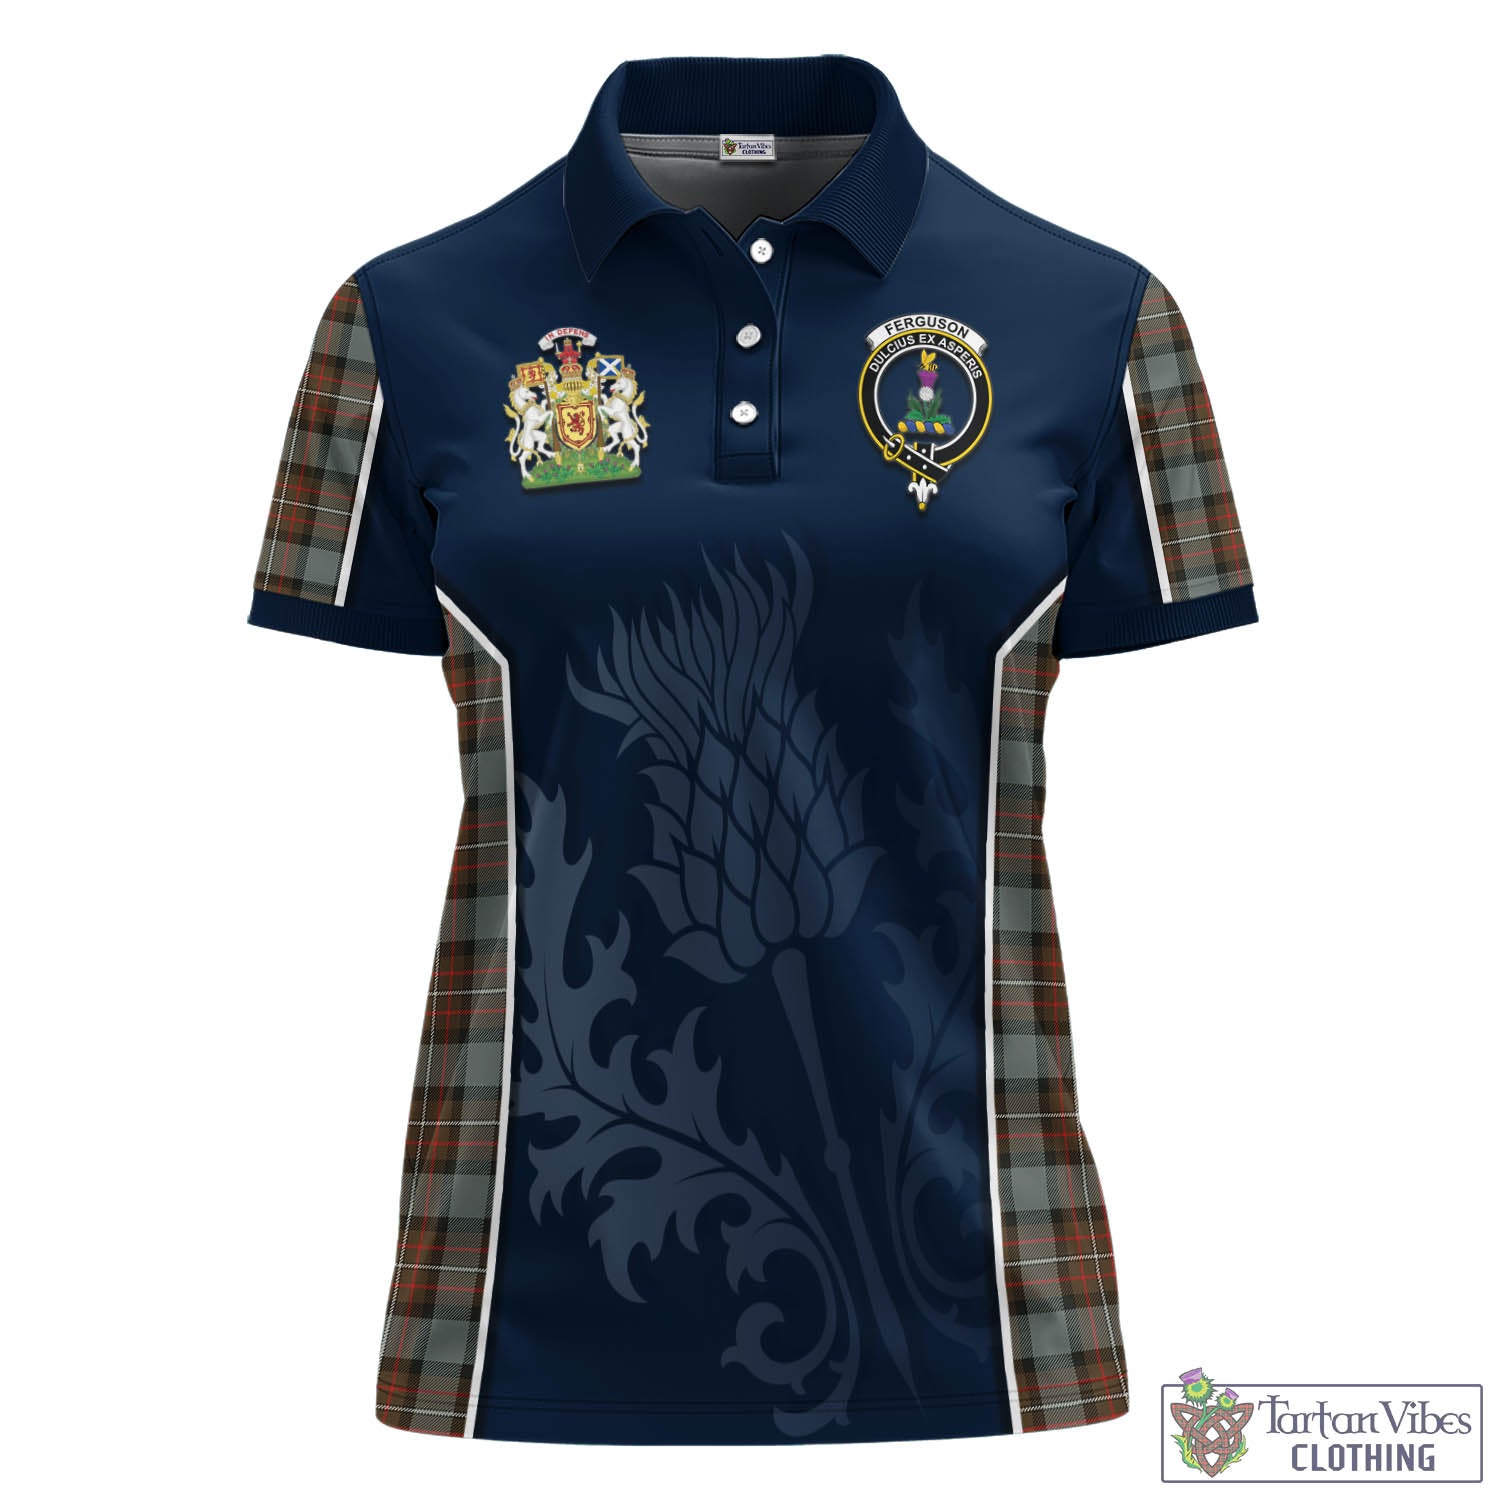 Tartan Vibes Clothing Ferguson Weathered Tartan Women's Polo Shirt with Family Crest and Scottish Thistle Vibes Sport Style